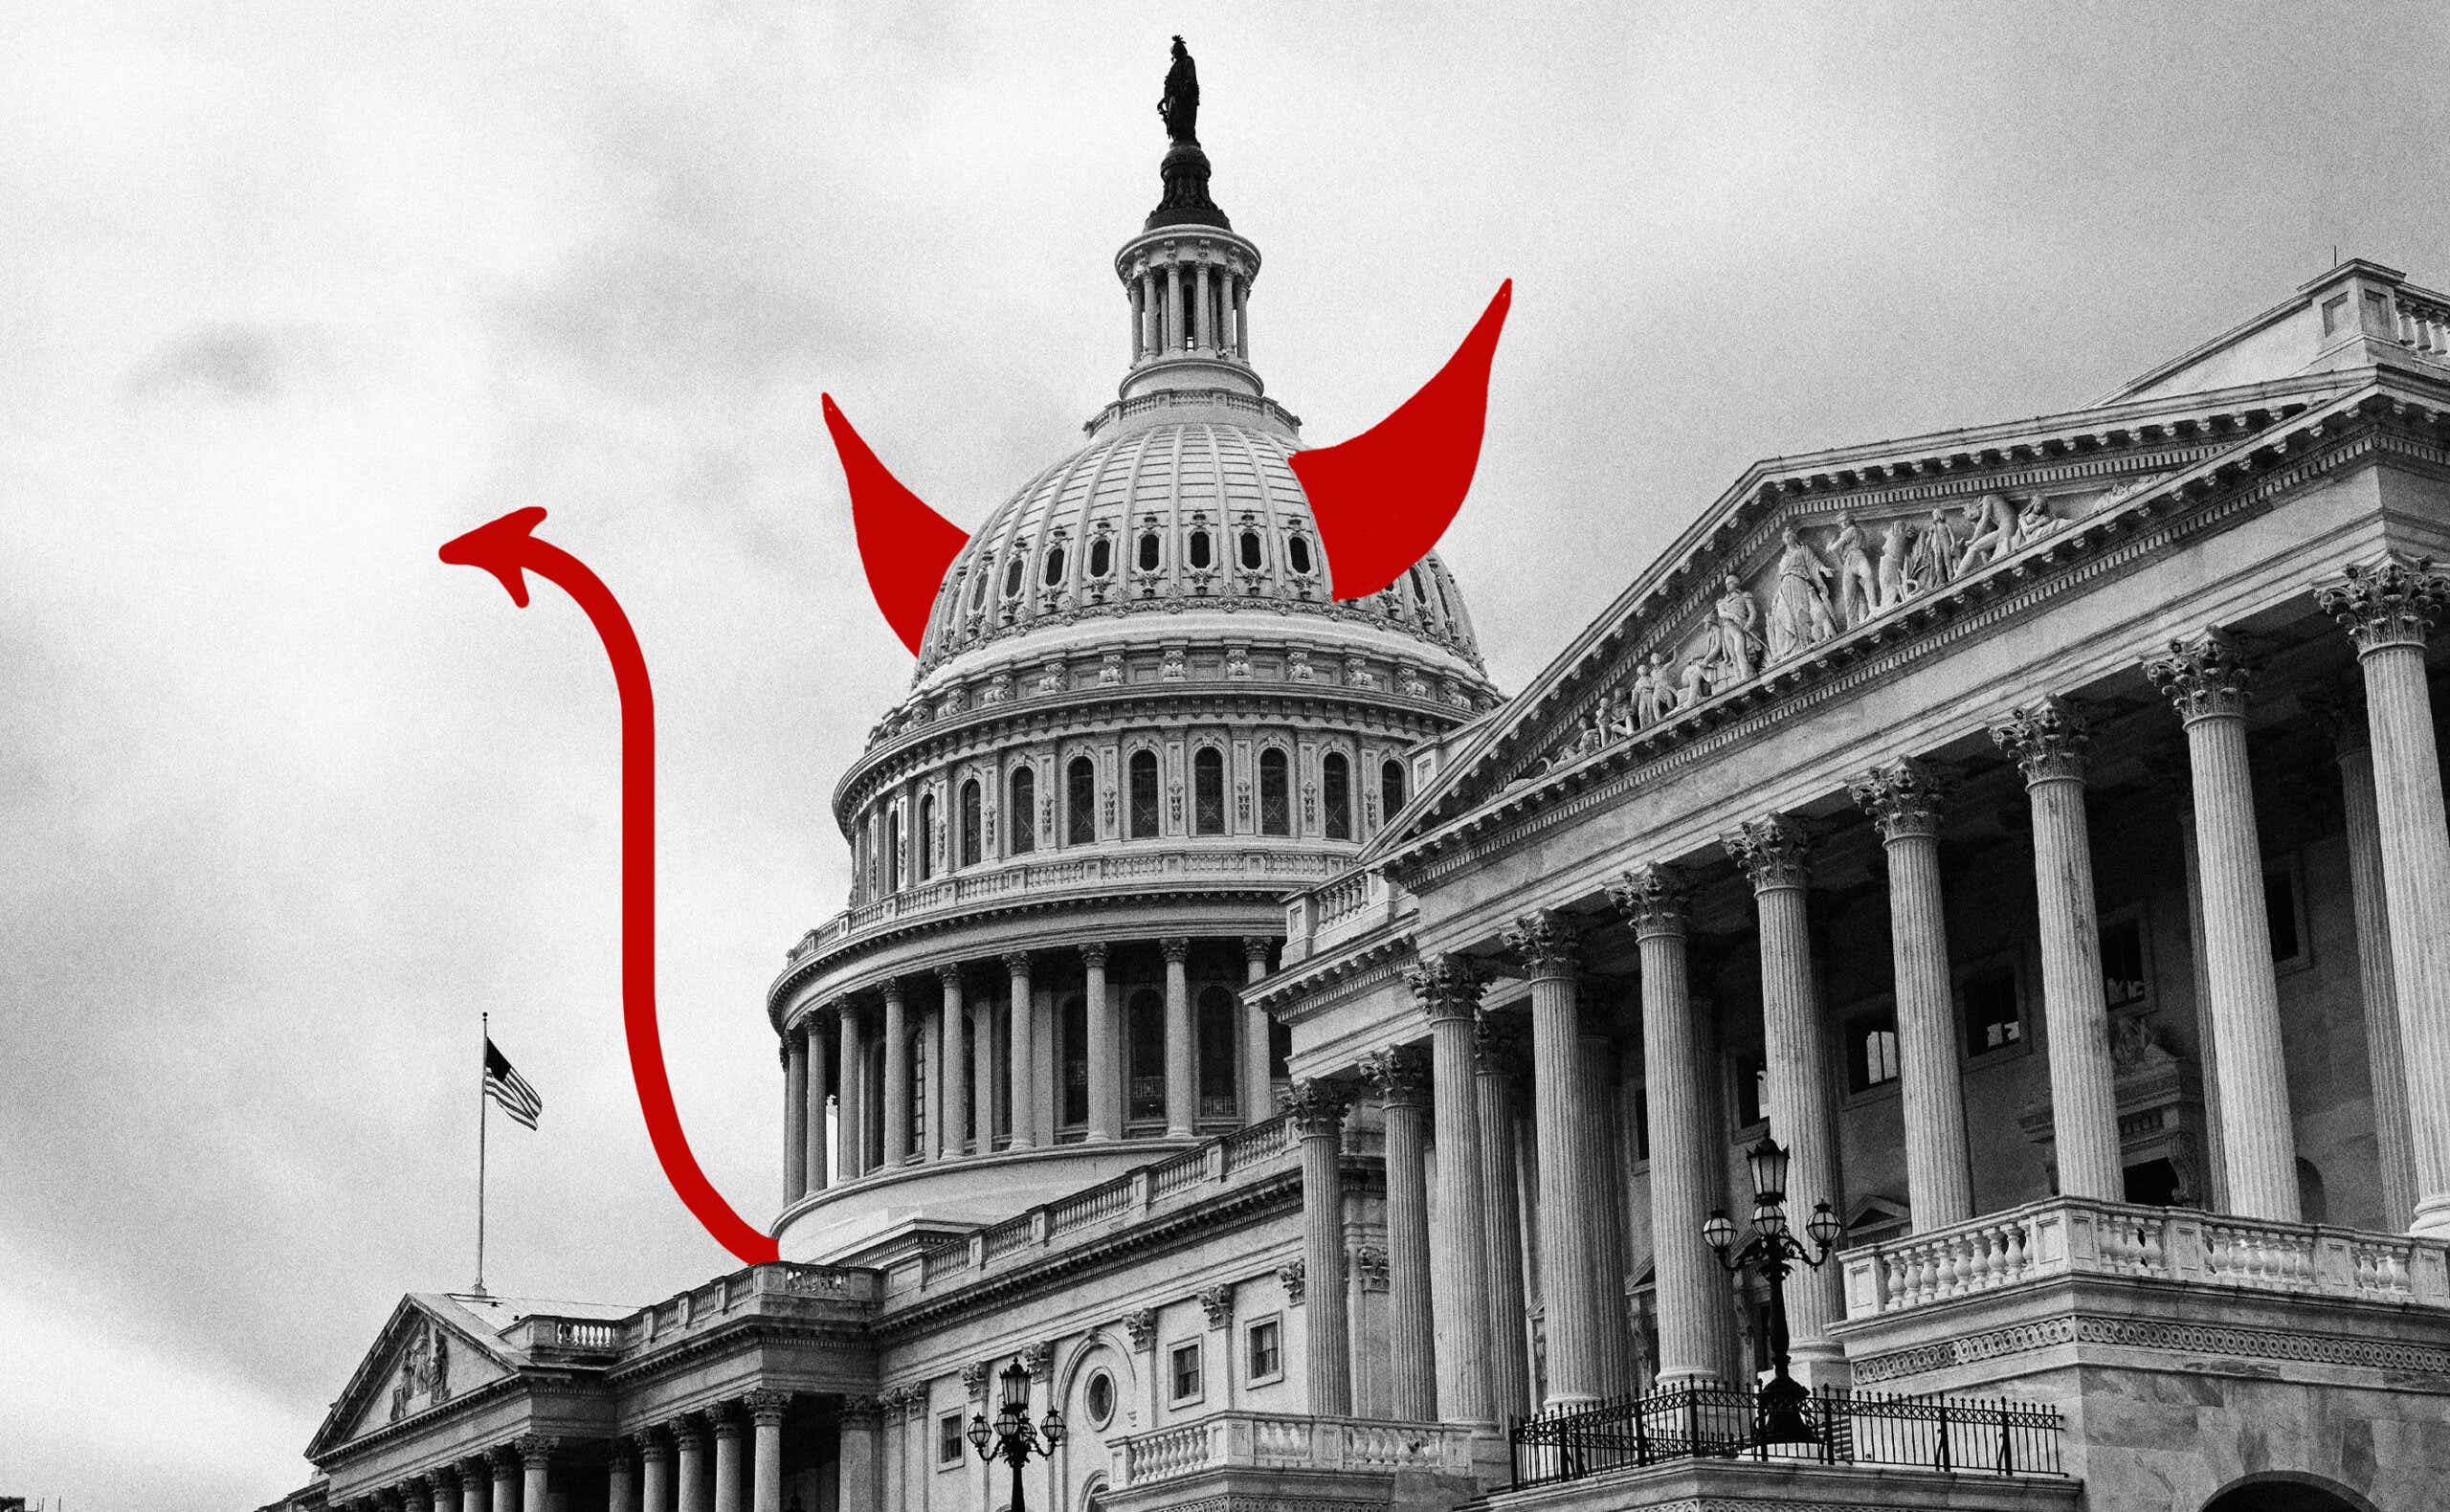 The Capitol with horns and a devil's tail drawn over it